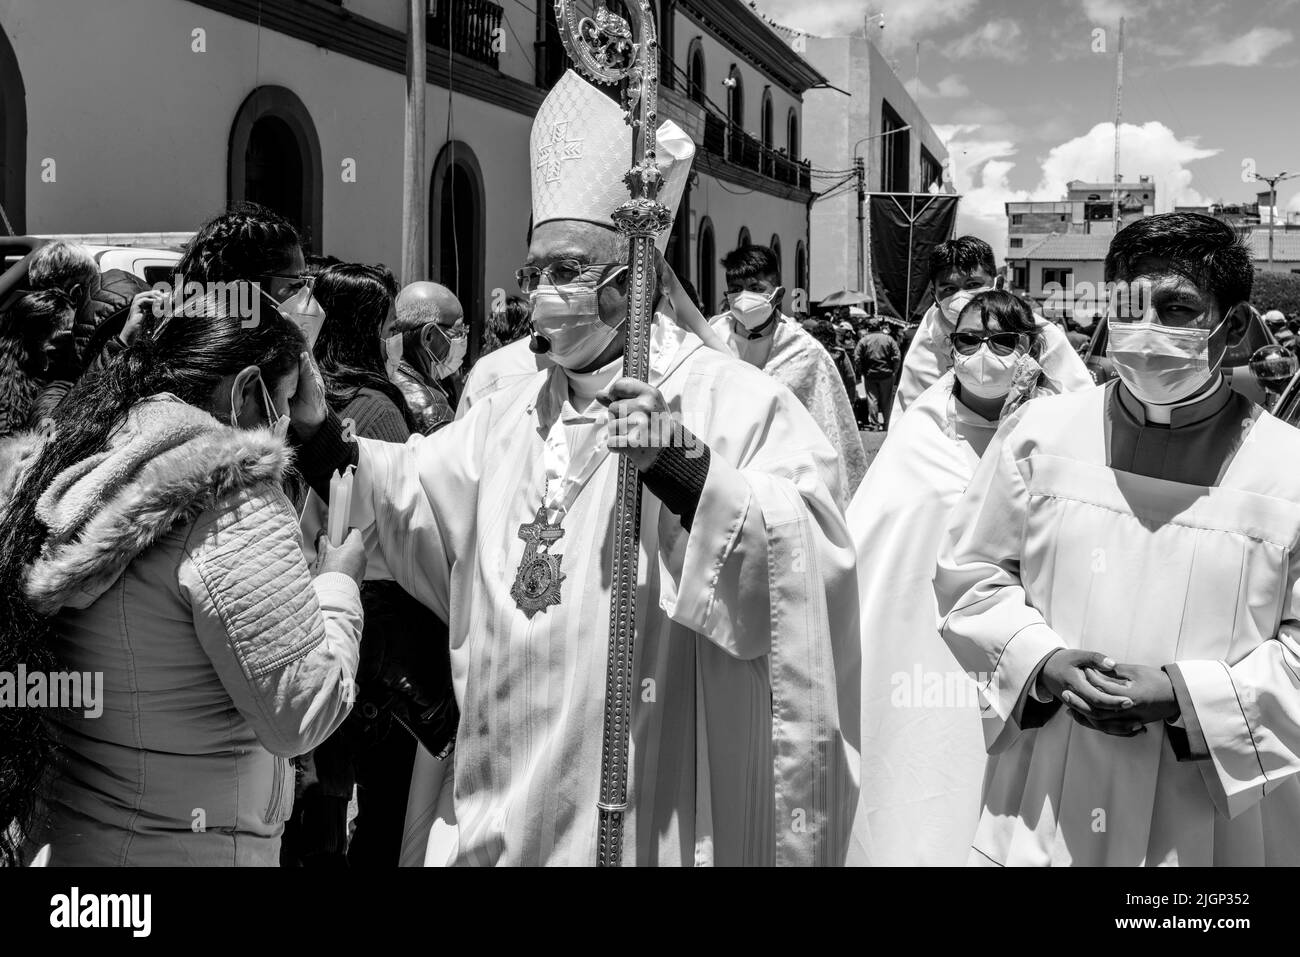 Catholic Priests Bless People In The Crowd After An Outdoor Mass In The Plaza De Armas, Puno, Puno Province, Peru. Stock Photo